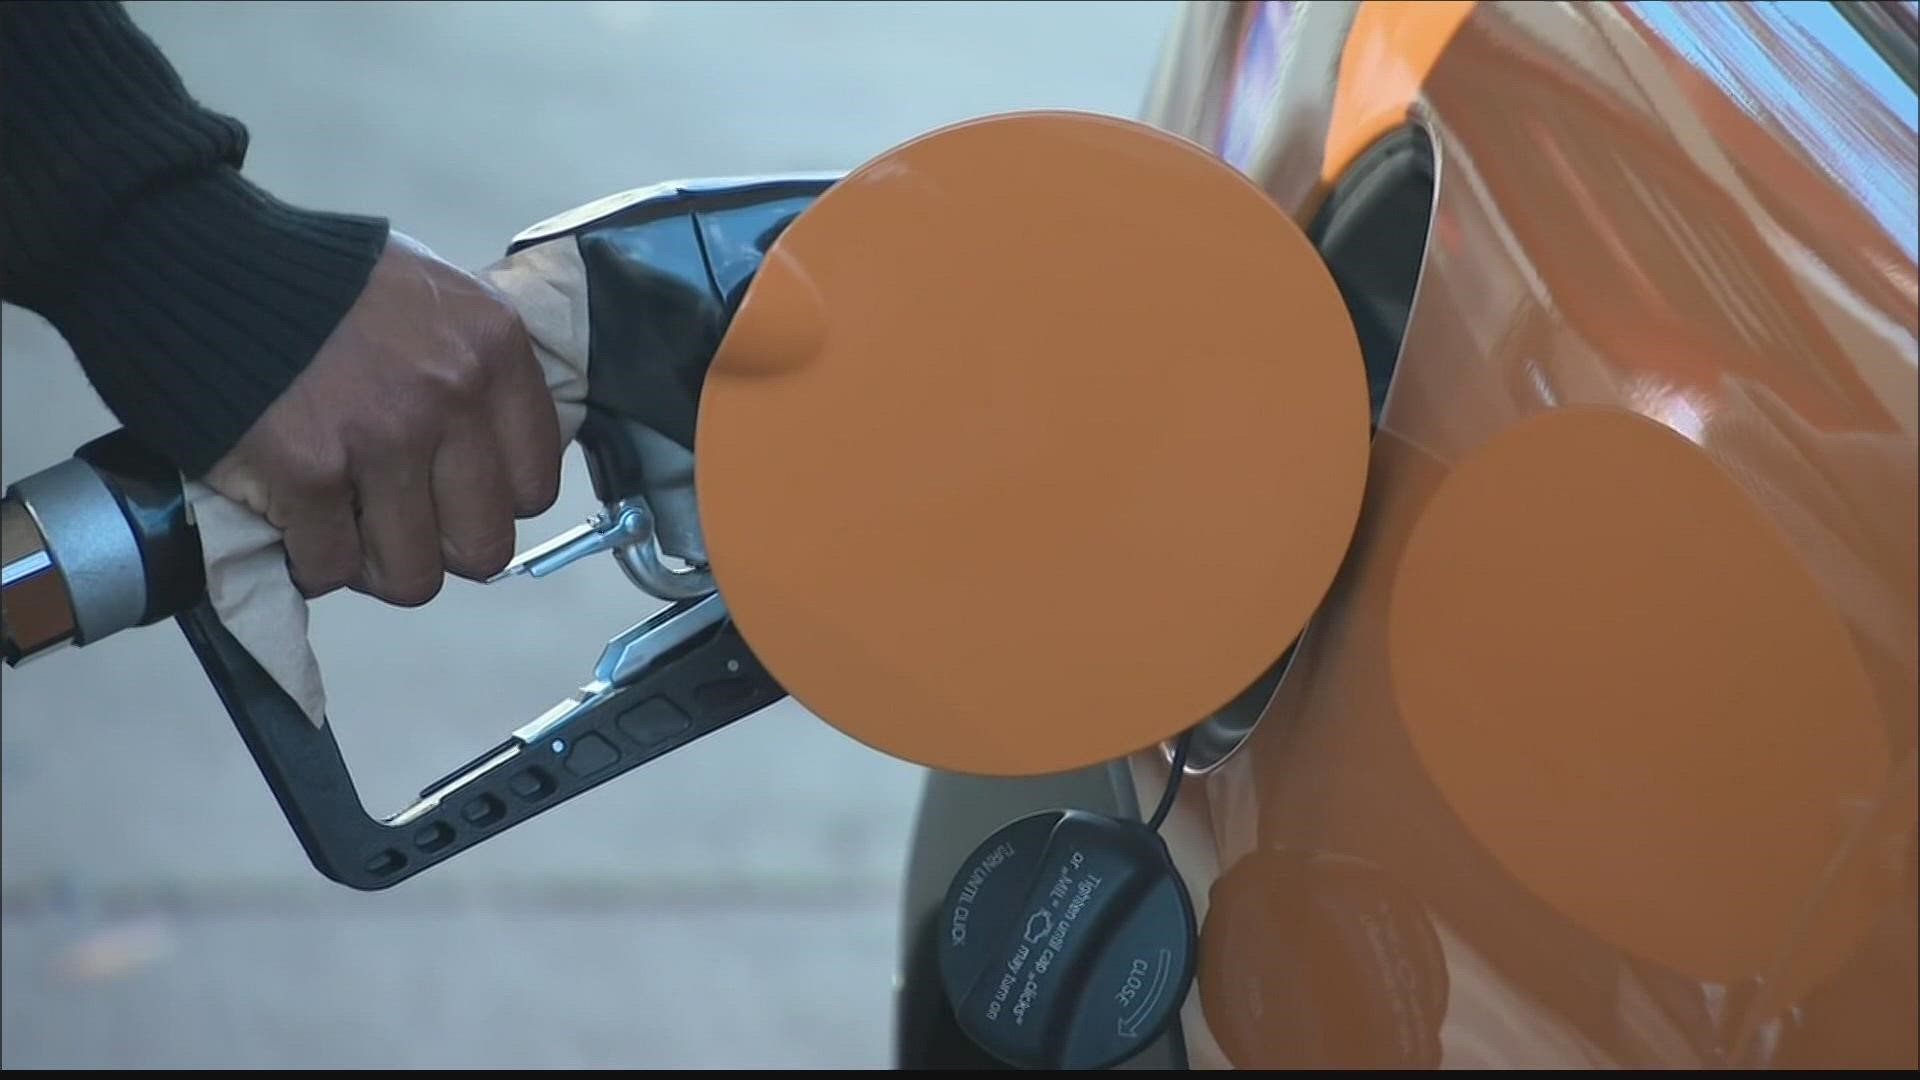 For the first time since early March, the national average price for a gallon of regular unleaded gas is below $4.